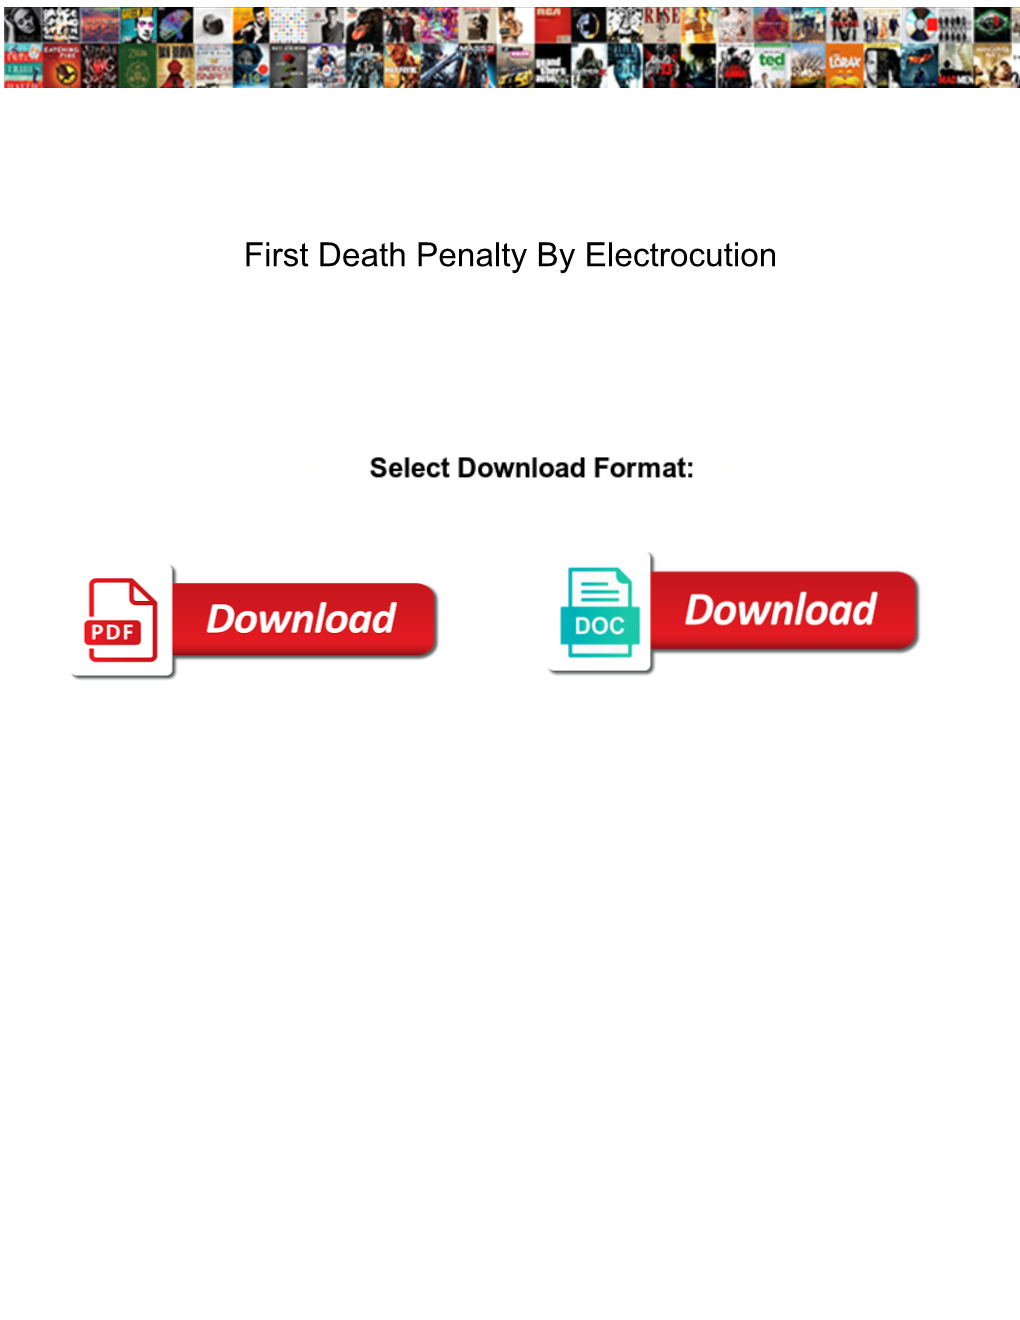 First Death Penalty by Electrocution